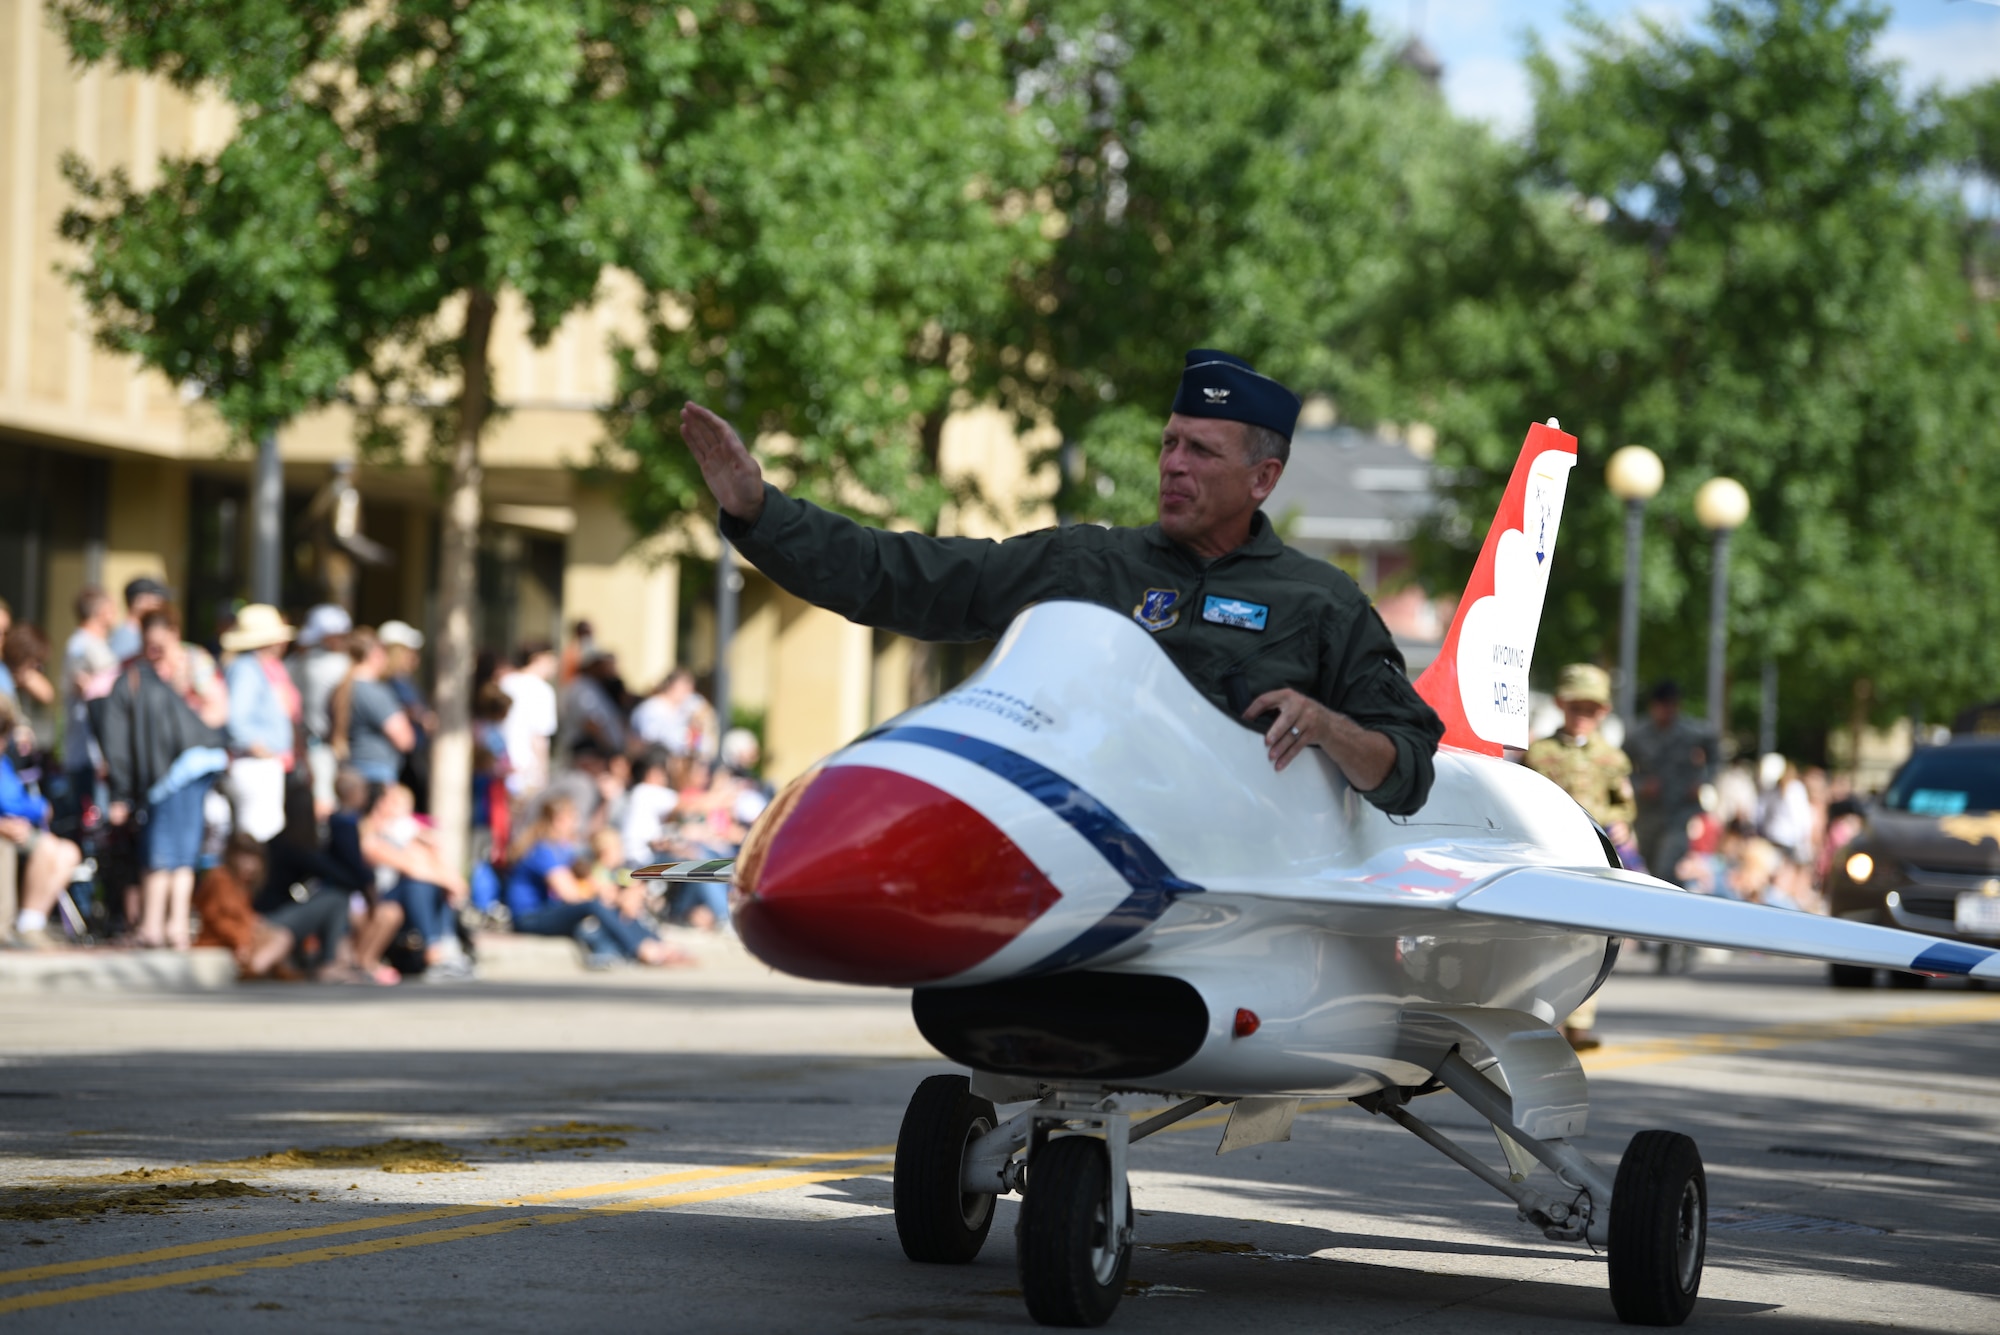 Col. Paul Lyman, Assistant Adjutant General, Wyoming National Guard, waves at the crowd while driving a miniature motorized vehicle during the 123rd Cheyenne Frontier Days opening Grand Parade in Cheyenne, Wyo., July 20, 2019. Service members from multiple branches took part in the parade. This year marks the 152nd anniversary of F.E. Warren Air Force Base and the city of Cheyenne. The F.E. Warren Air Force Base and Cheyenne communities came together to celebrate the CFD rodeo and festival, which runs from July 19-28. (U.S. Air Force photo by Staff Sgt. Ashley N. Sokolov)